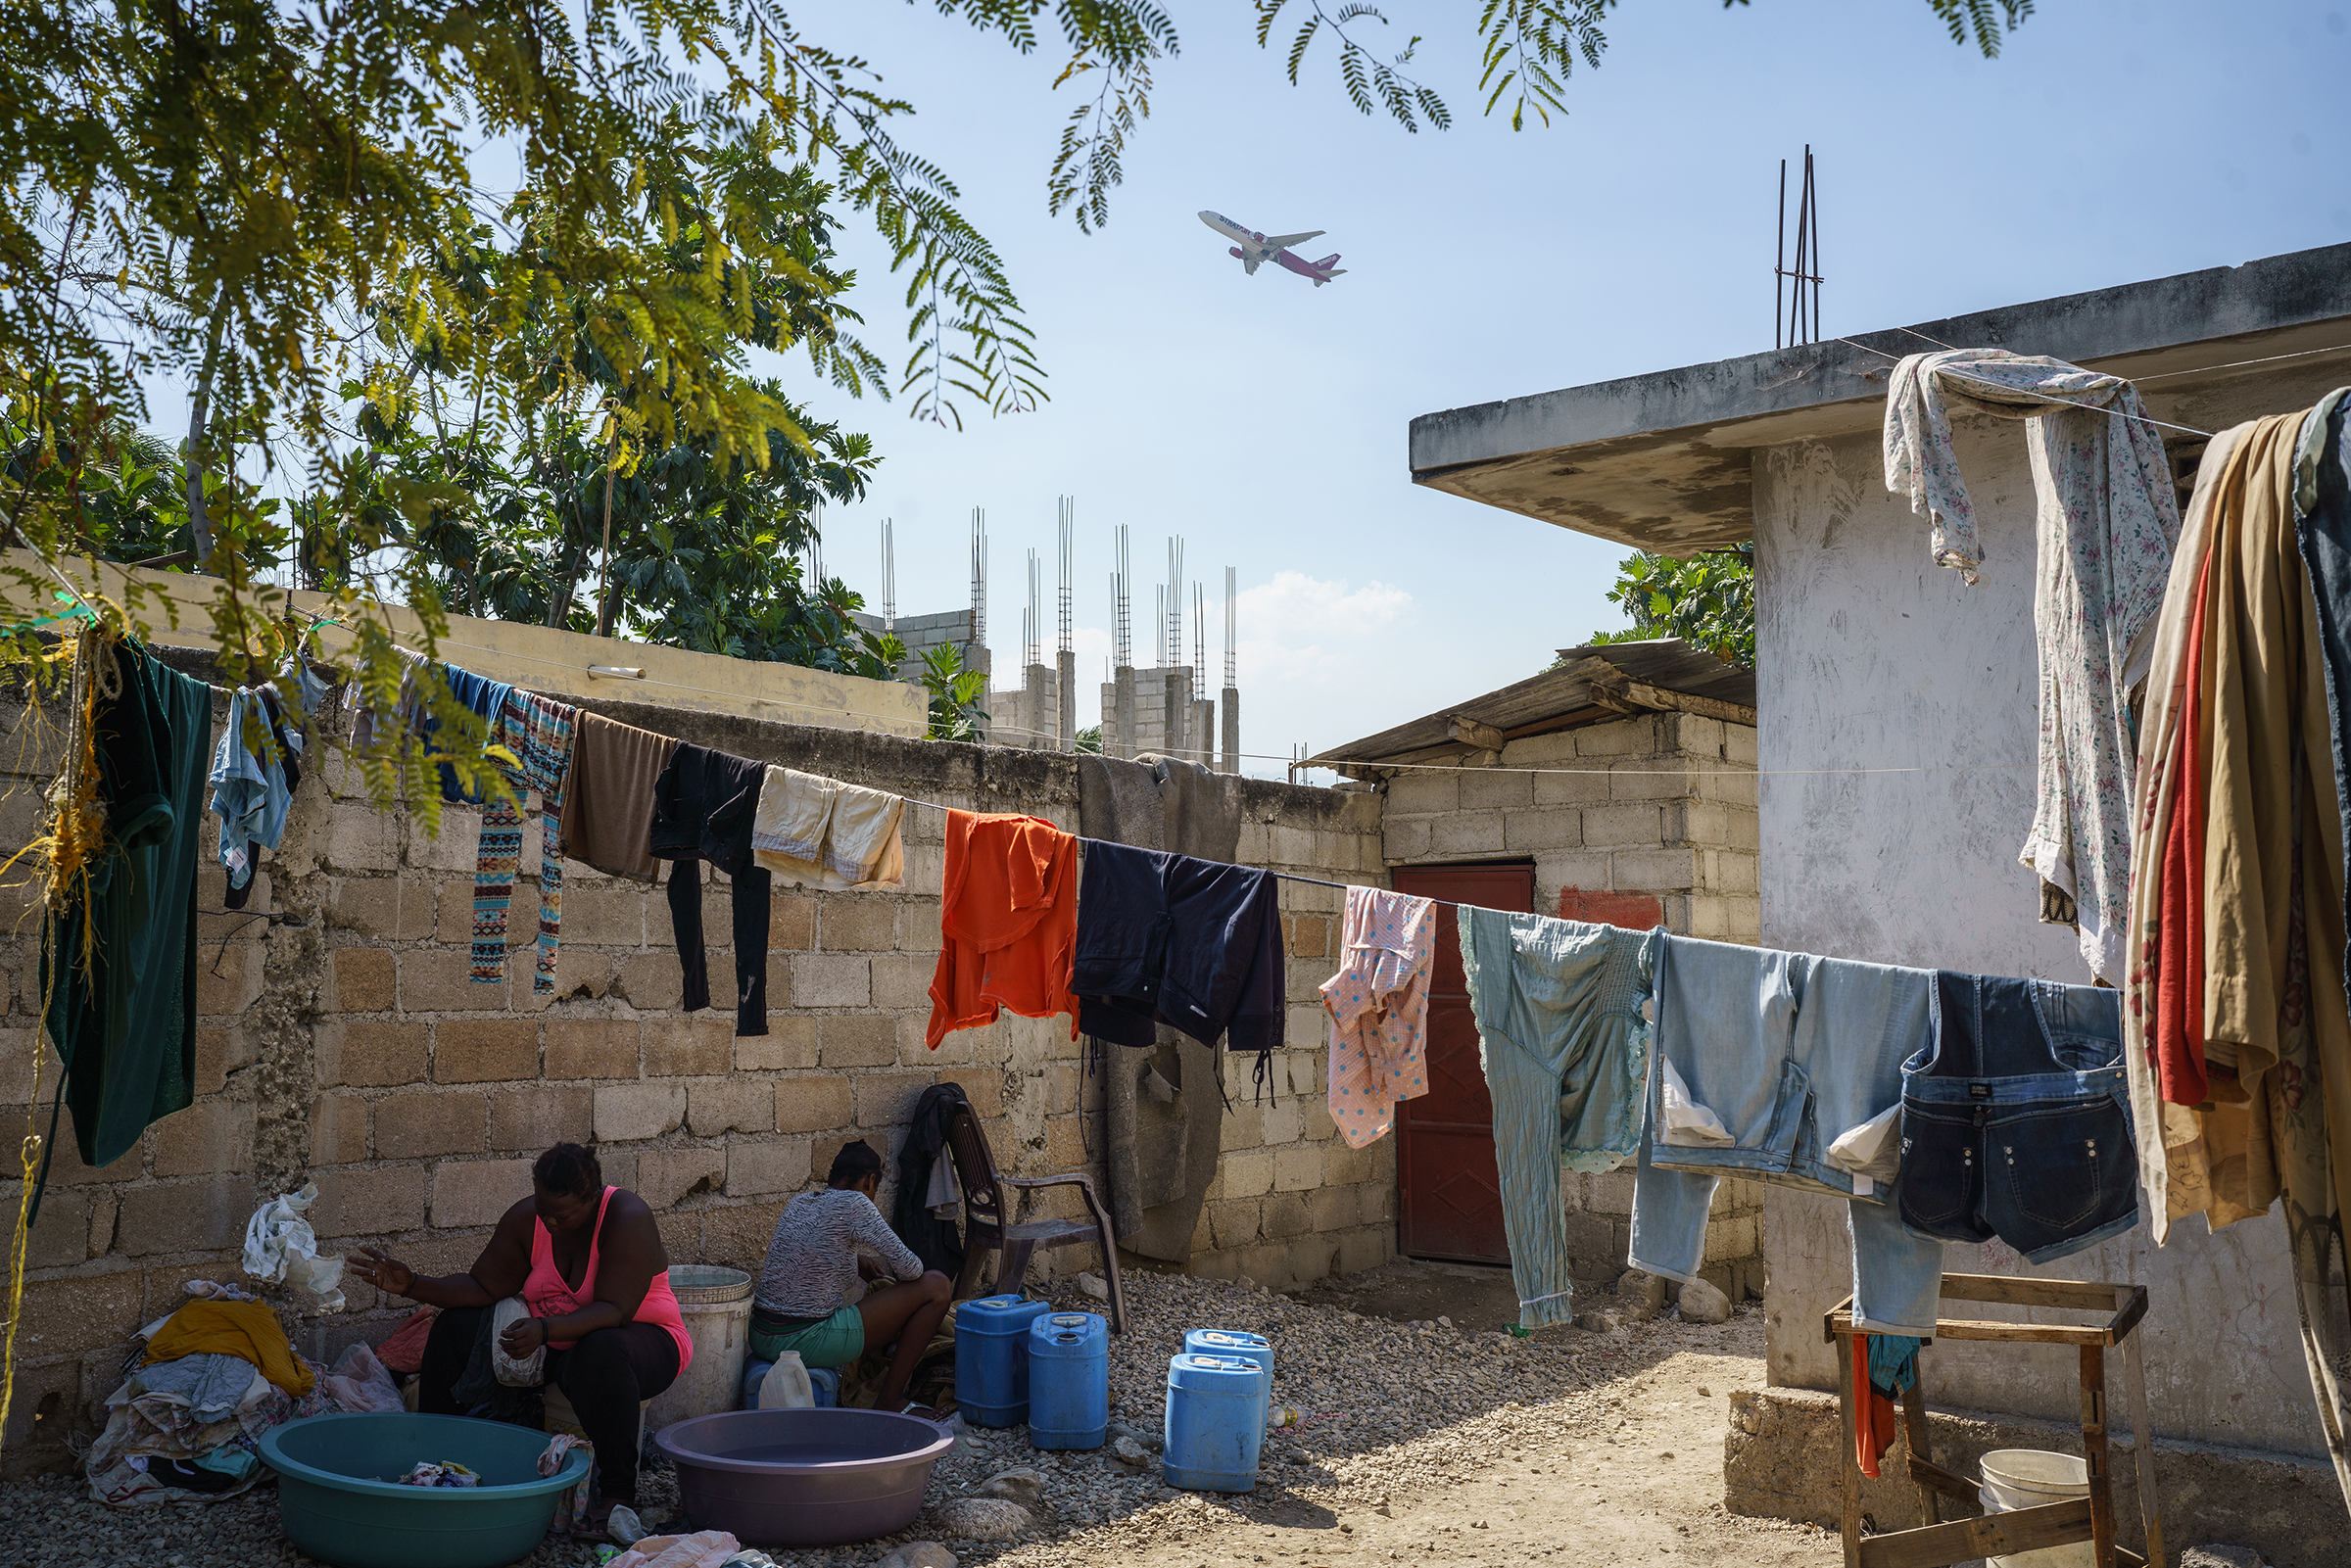 A plane takes off over the courtyard of a house that Mirard Joseph is staying in Port-au-Prince, Haiti on Saturday, January 22, 2022.